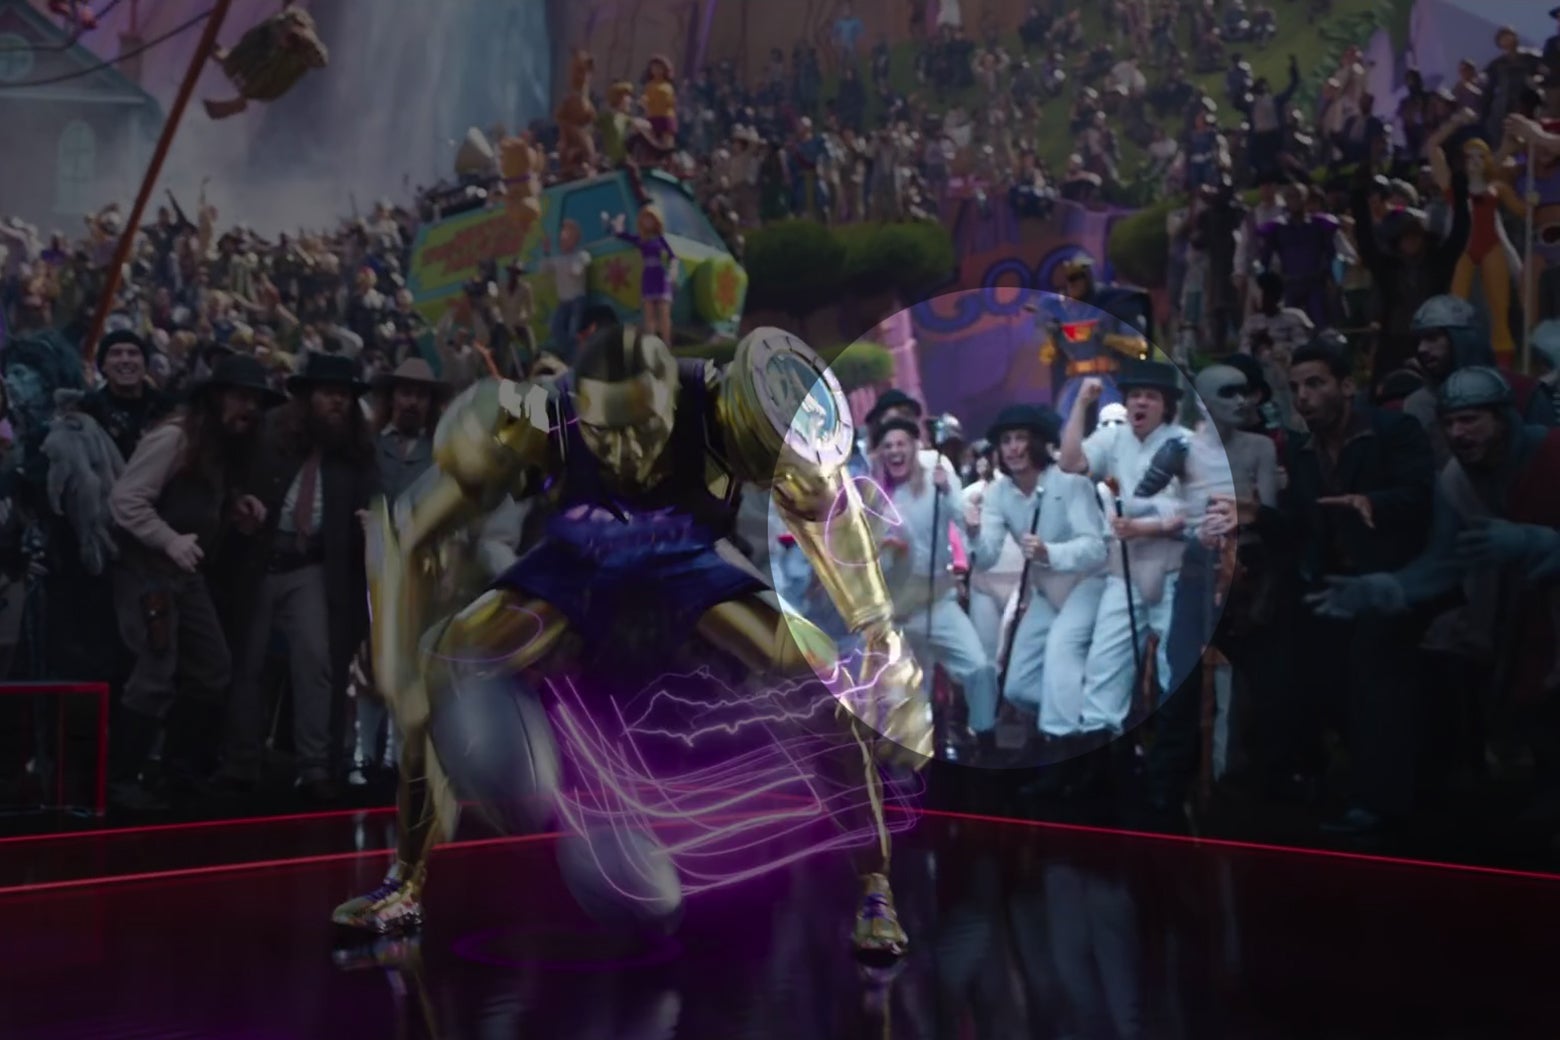 A shot from Space Jam: A New Legacy showing Cronos, a gold robot, dribbling on a basketball court. In the crowd, cheering, are three characters from A Clockwork Orange.